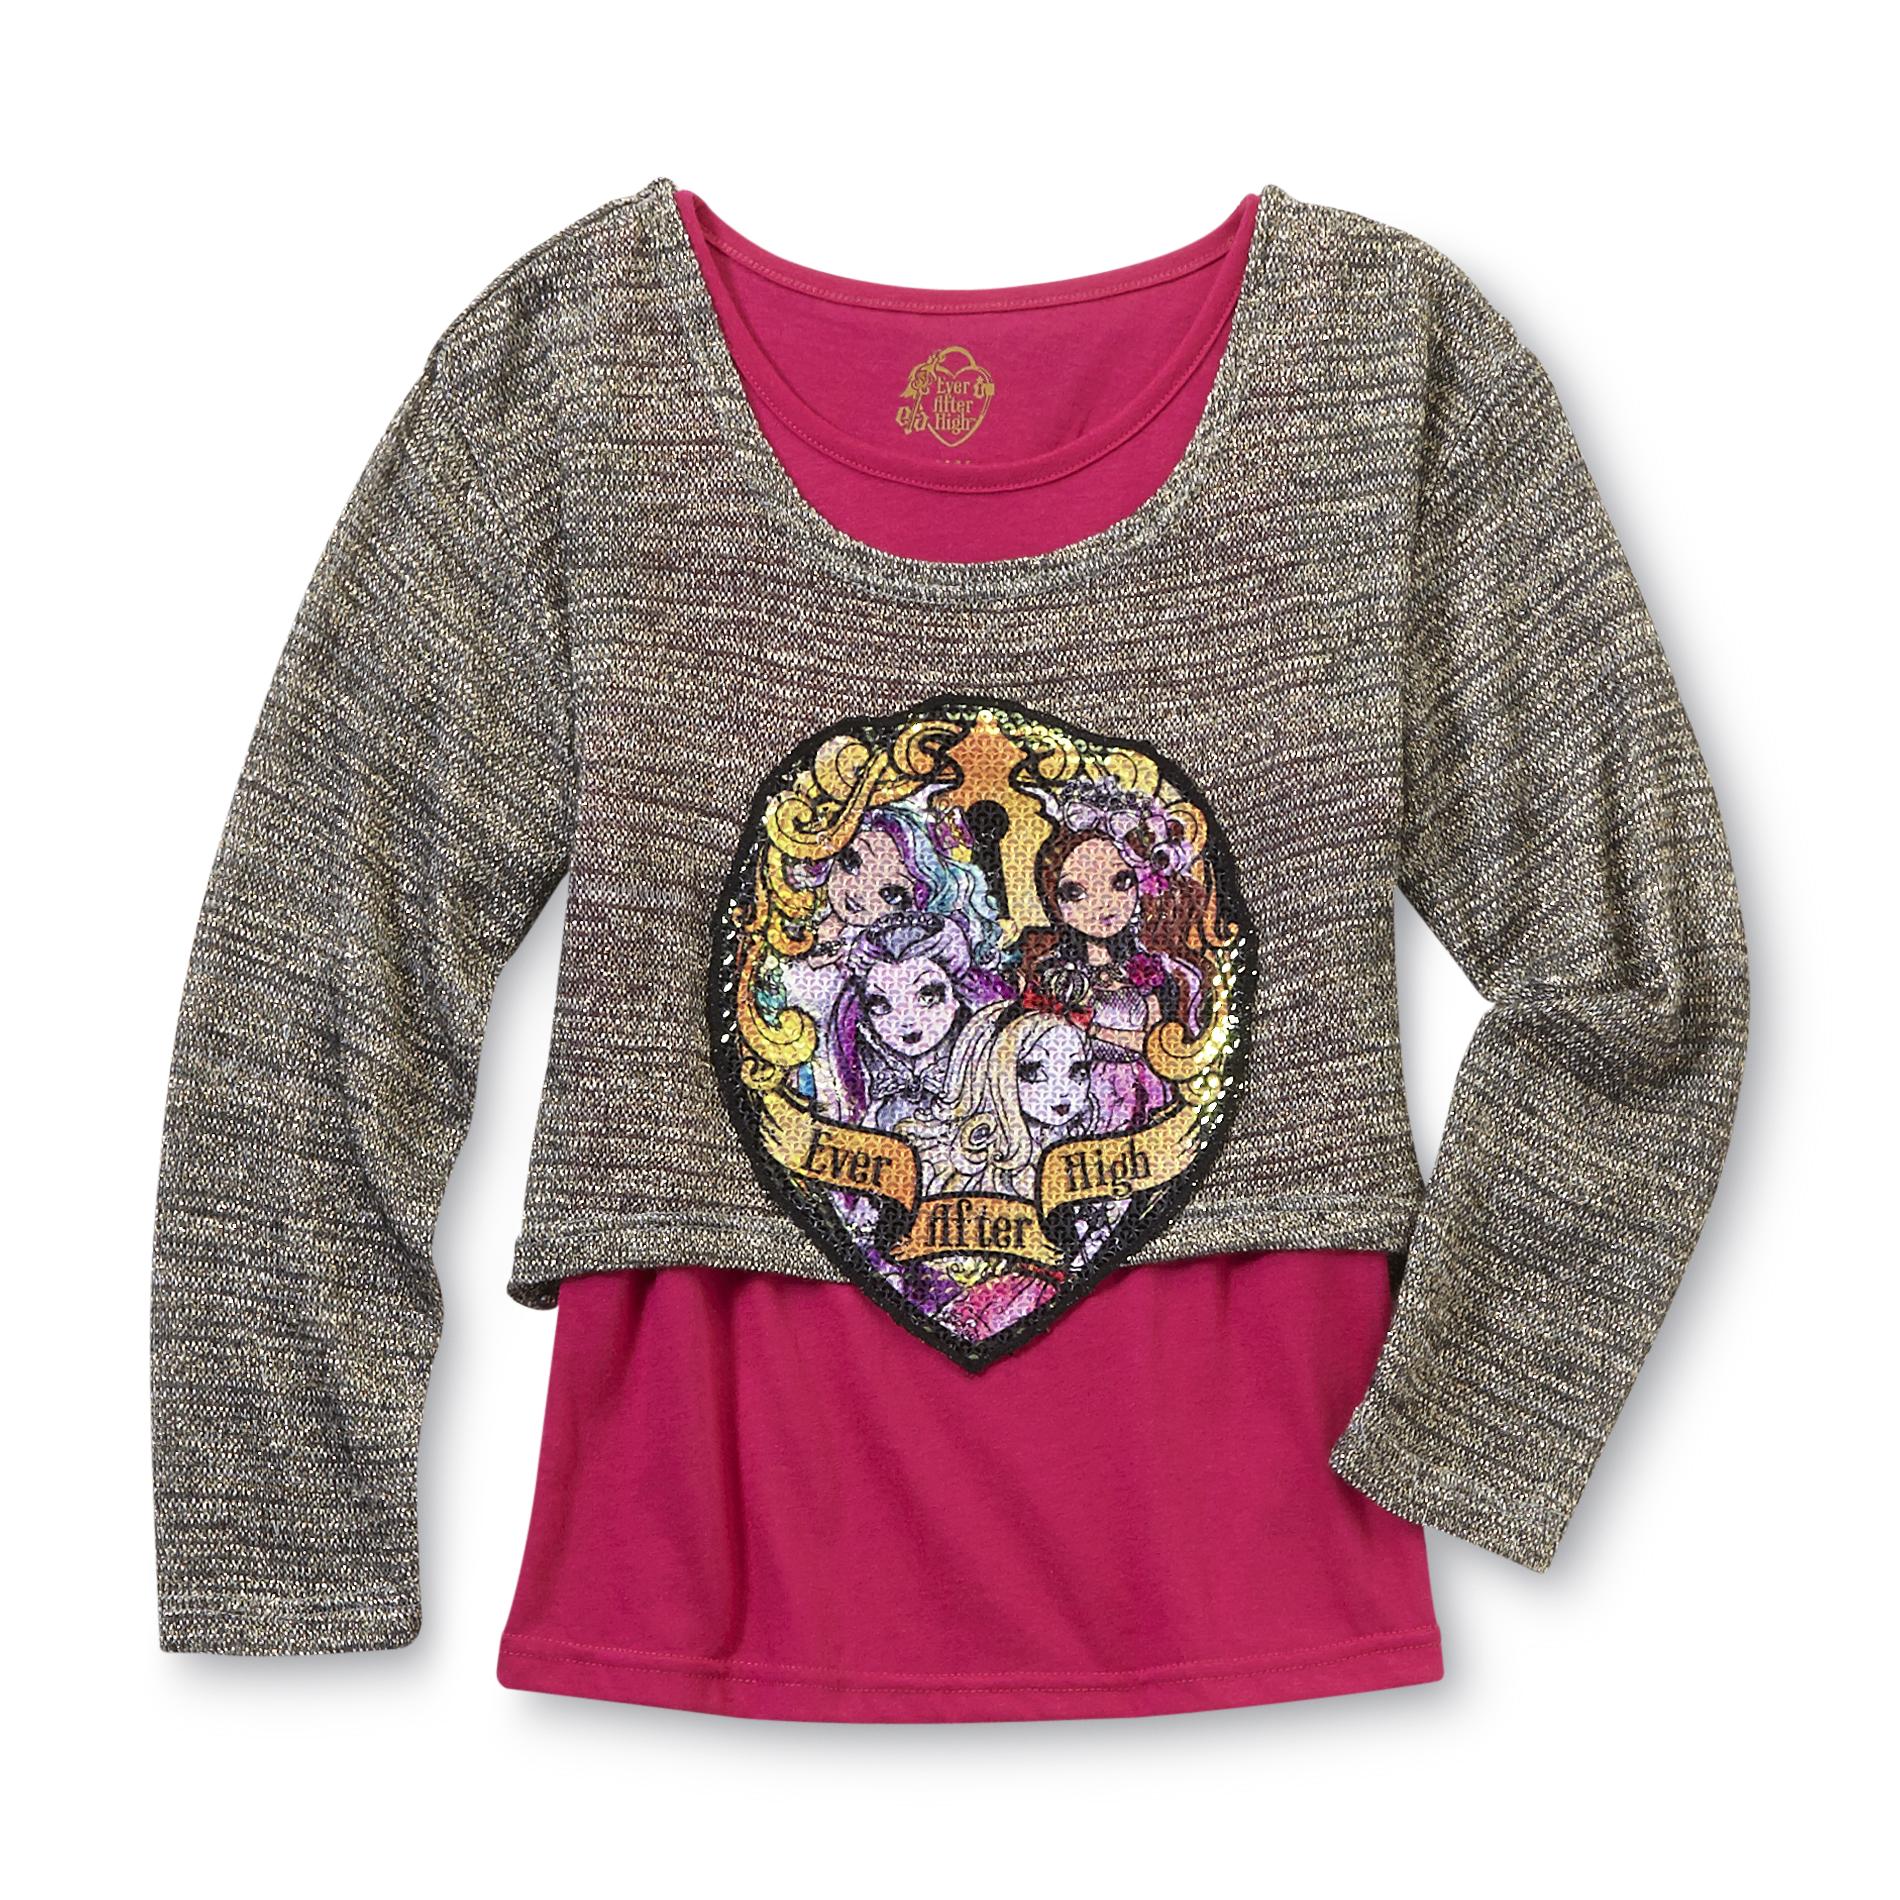 Ever After High Girl's Layered Top